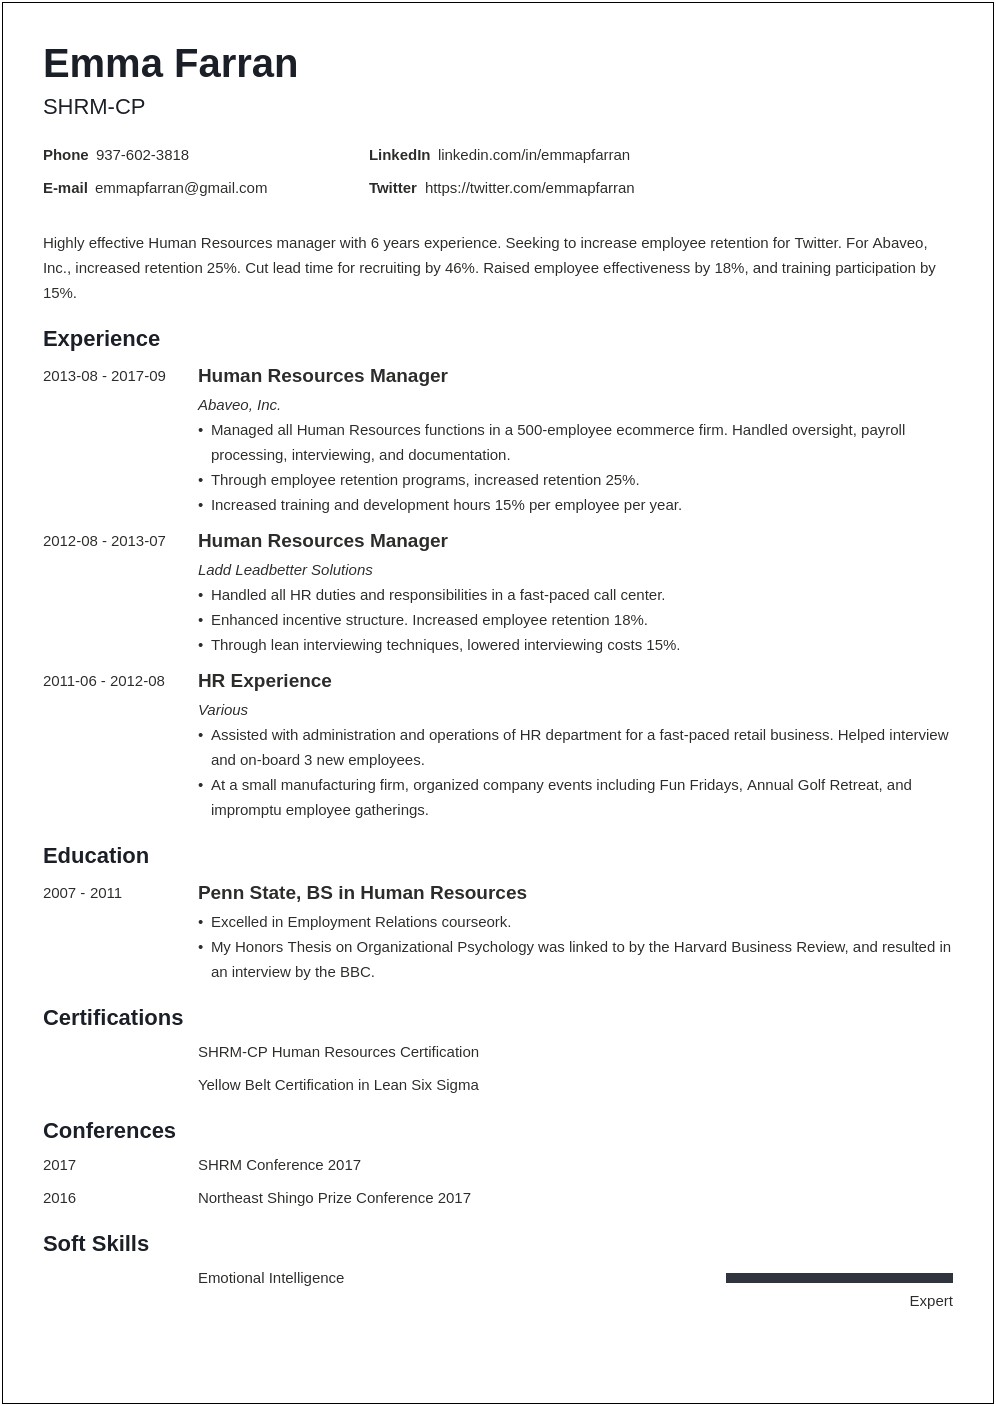 Resume Summary Statement With No Experience Human Resources